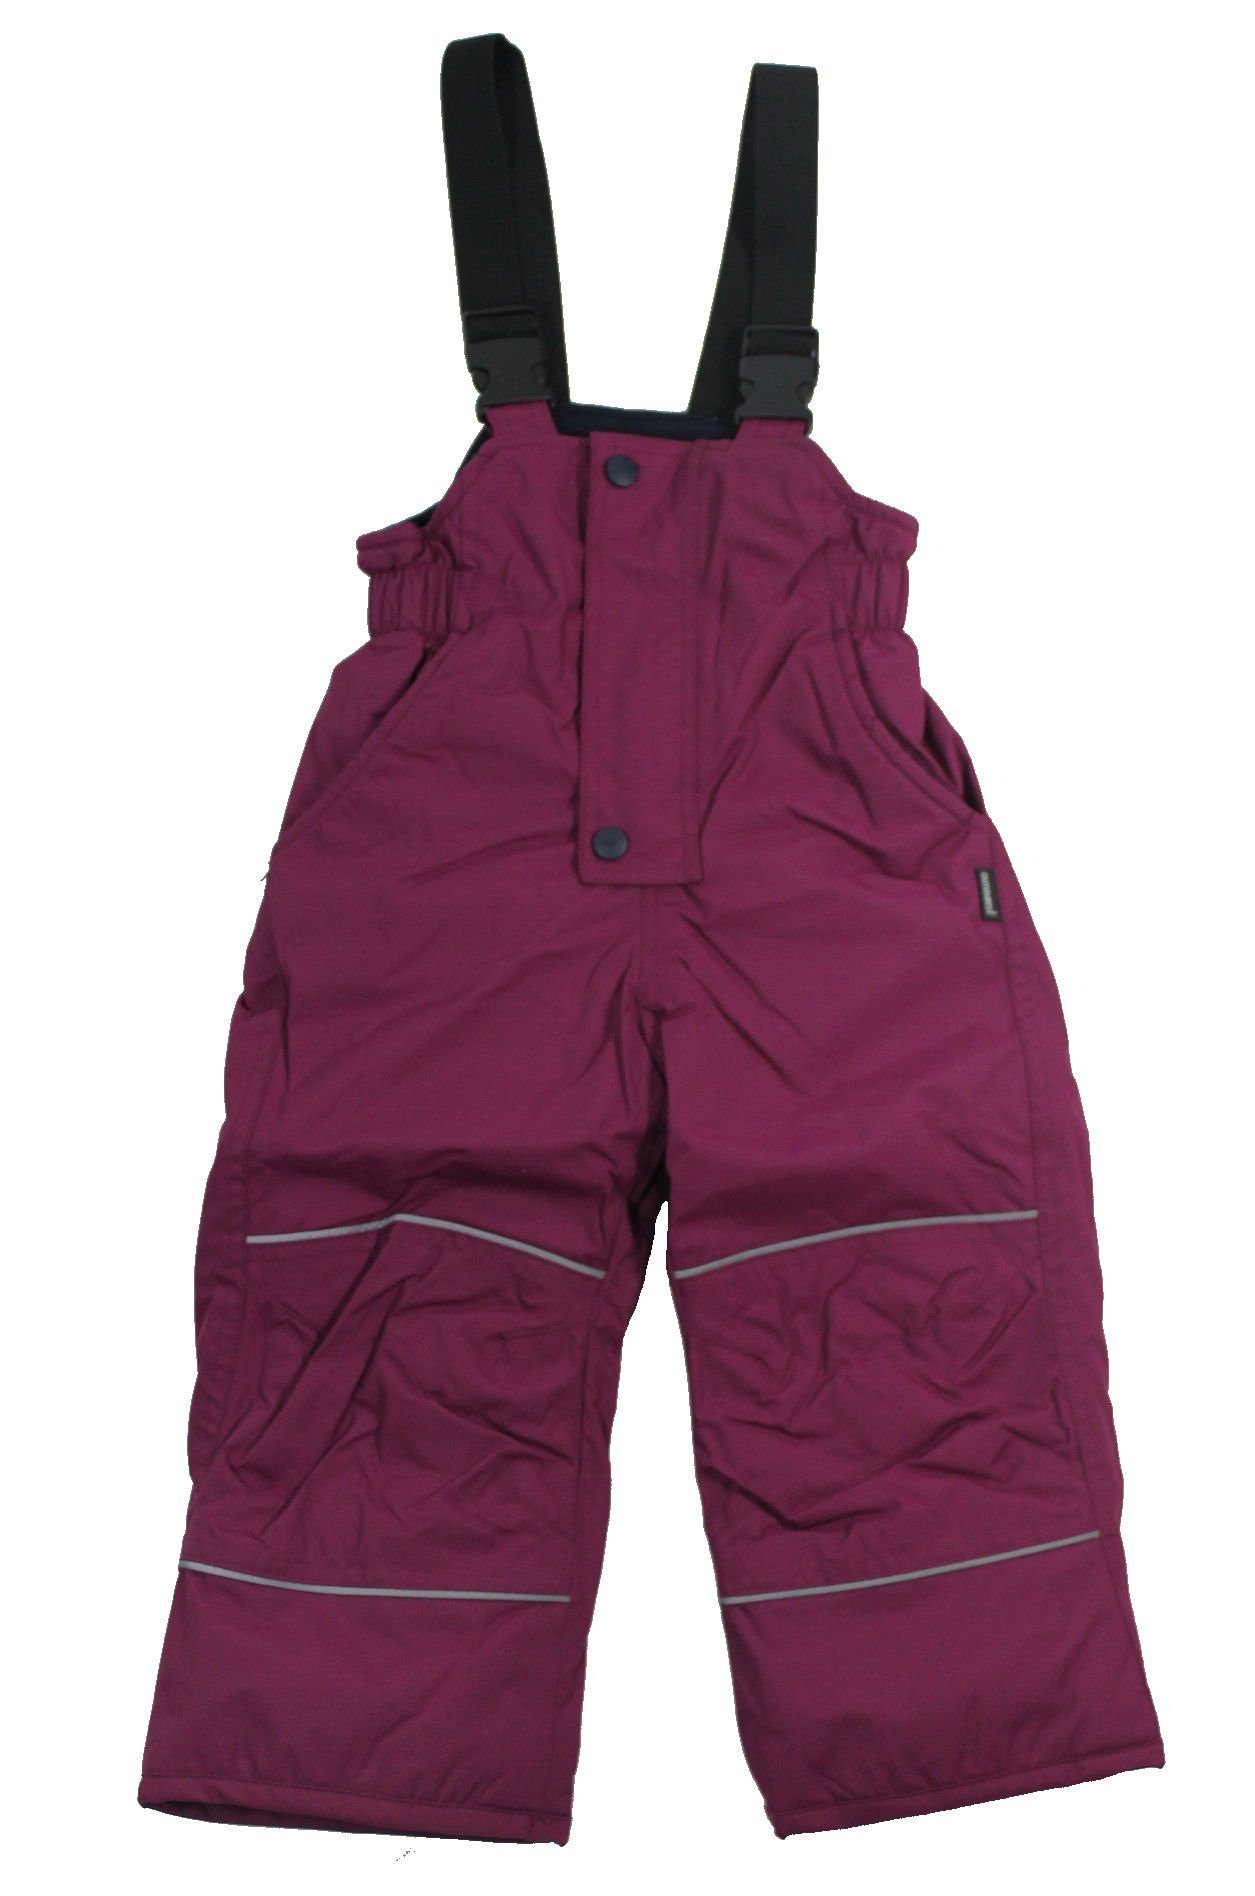 Outburst (1-tlg) Funktions Schneehose berry Mädchen Skihose Latzhose Schneehose Outburst